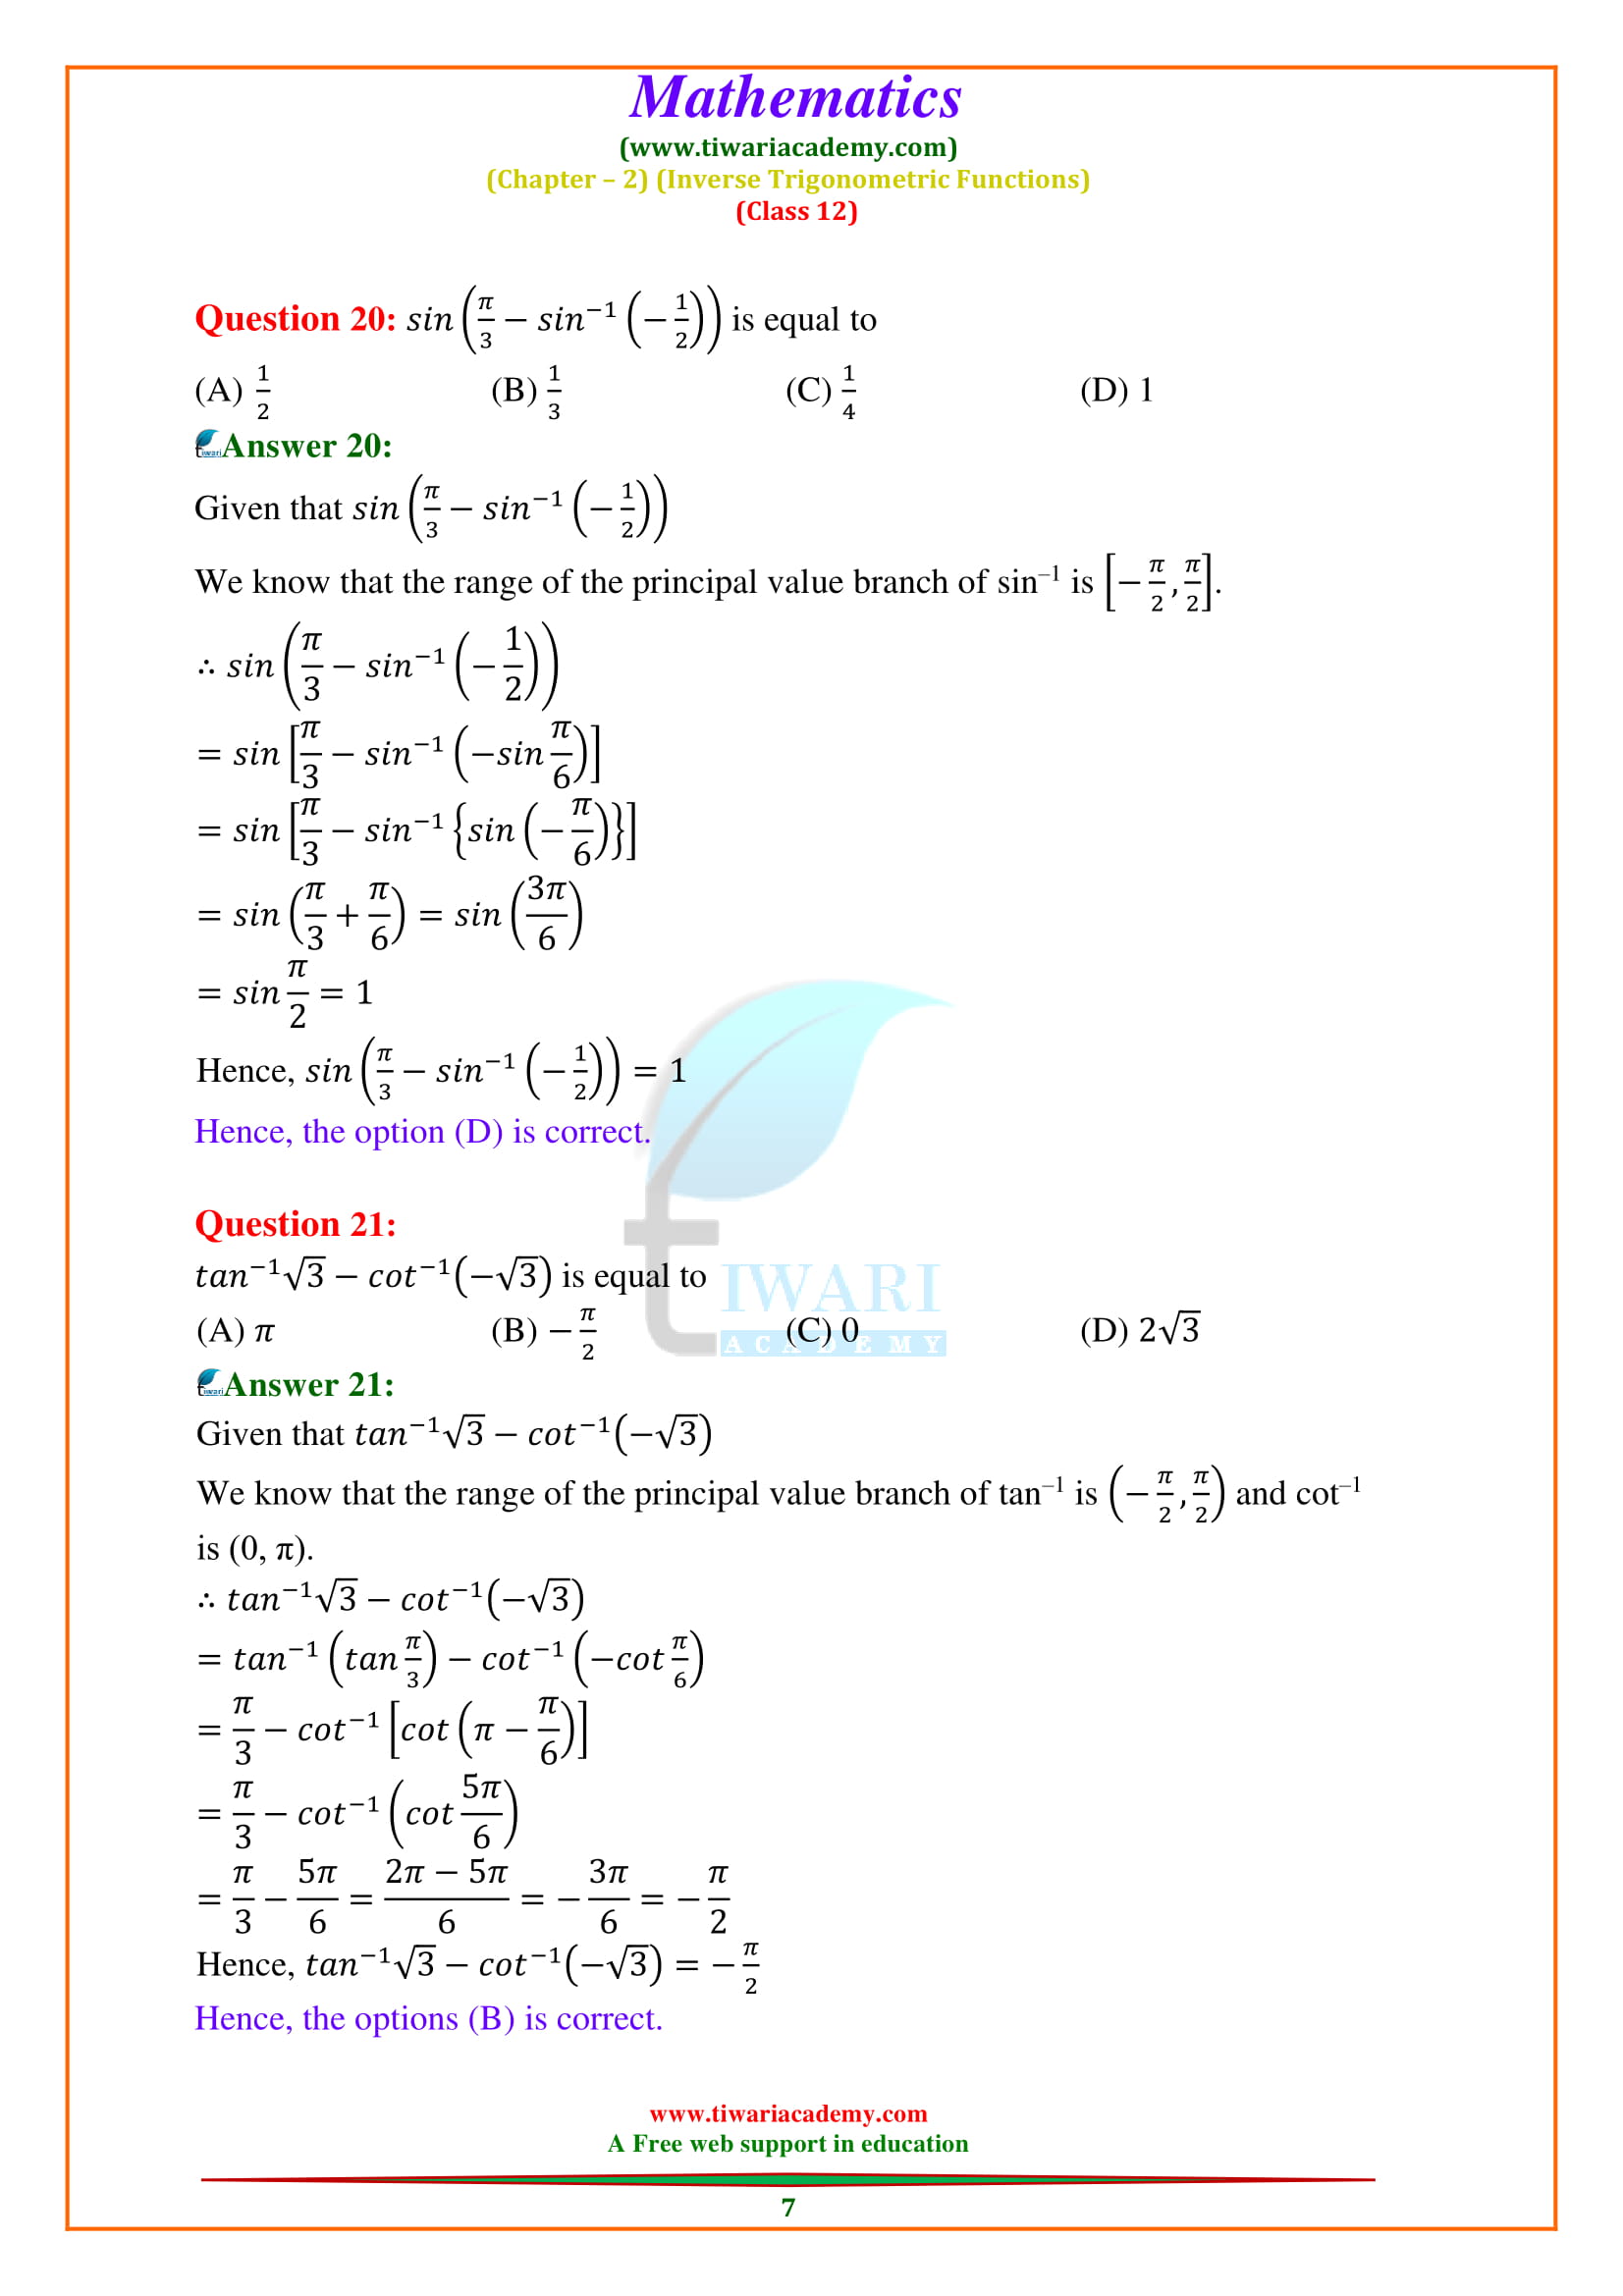 Class 12 Maths Chapter 2 Exercise 2.2 question 1, 2, 3, 4, 5, 6, 7, 8, 9,10, 16